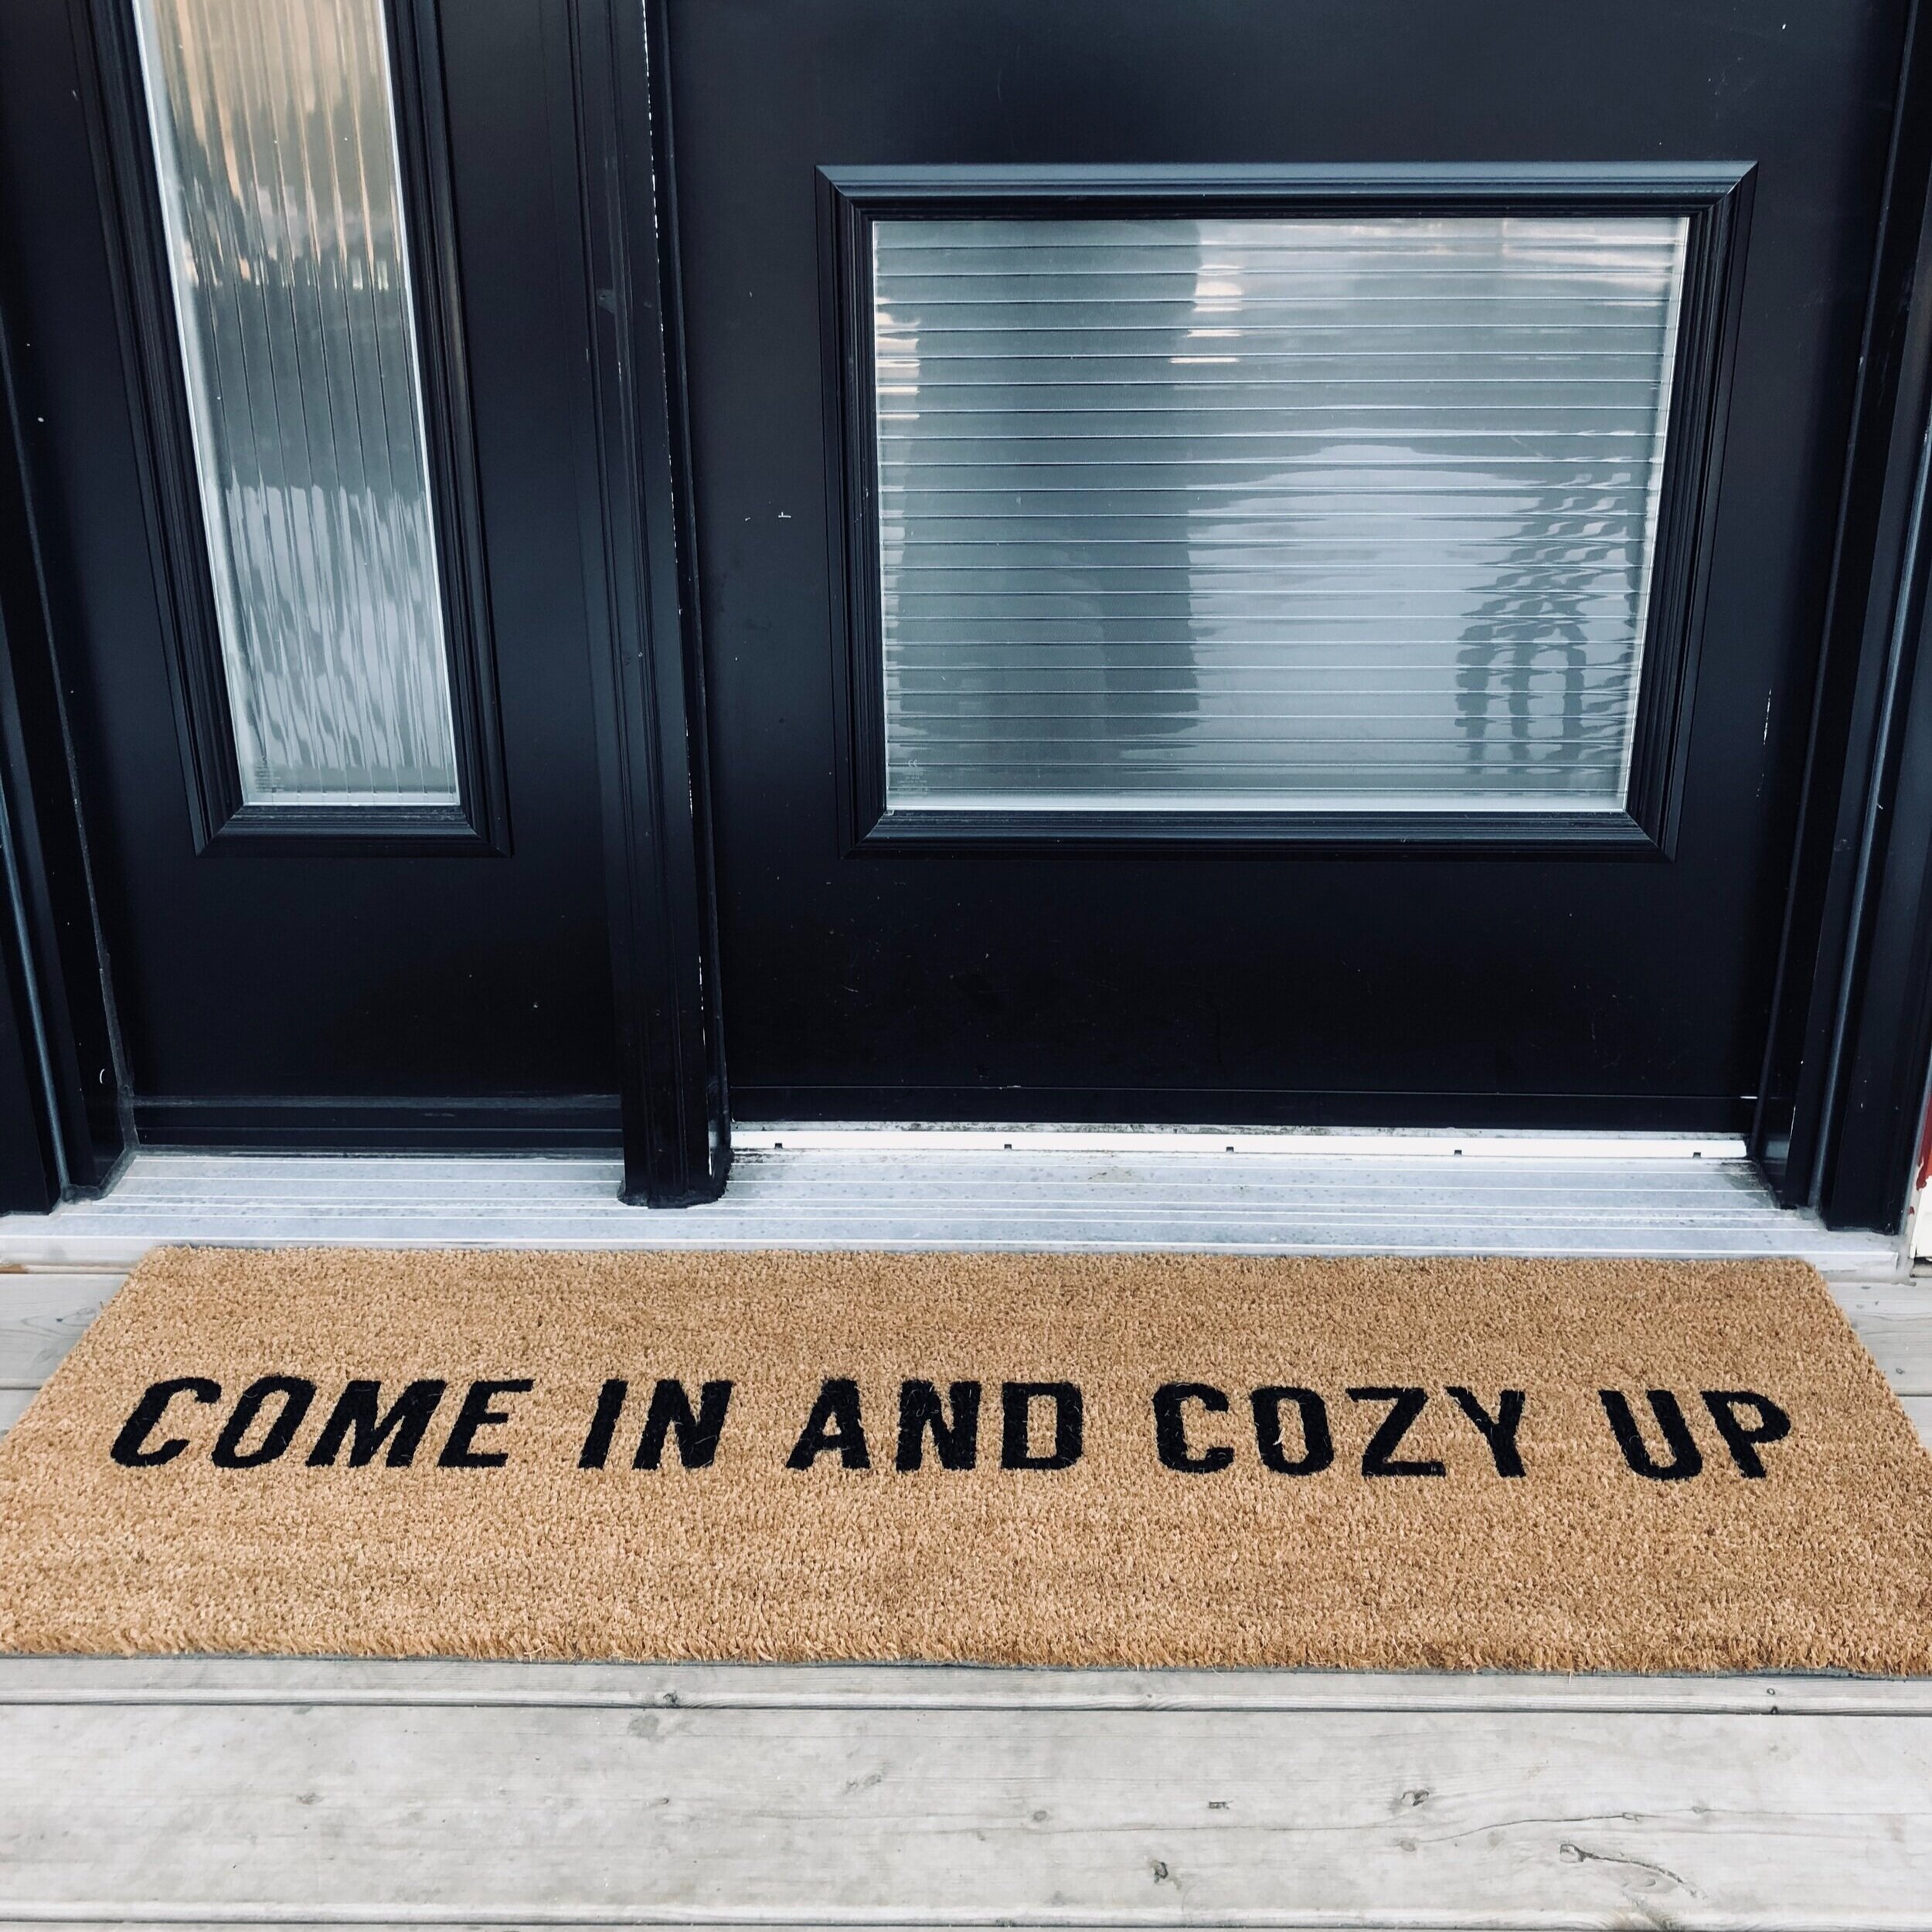 Somebody keeps putting a welcome mat in front of my apartment door. :  r/mildlyinfuriating